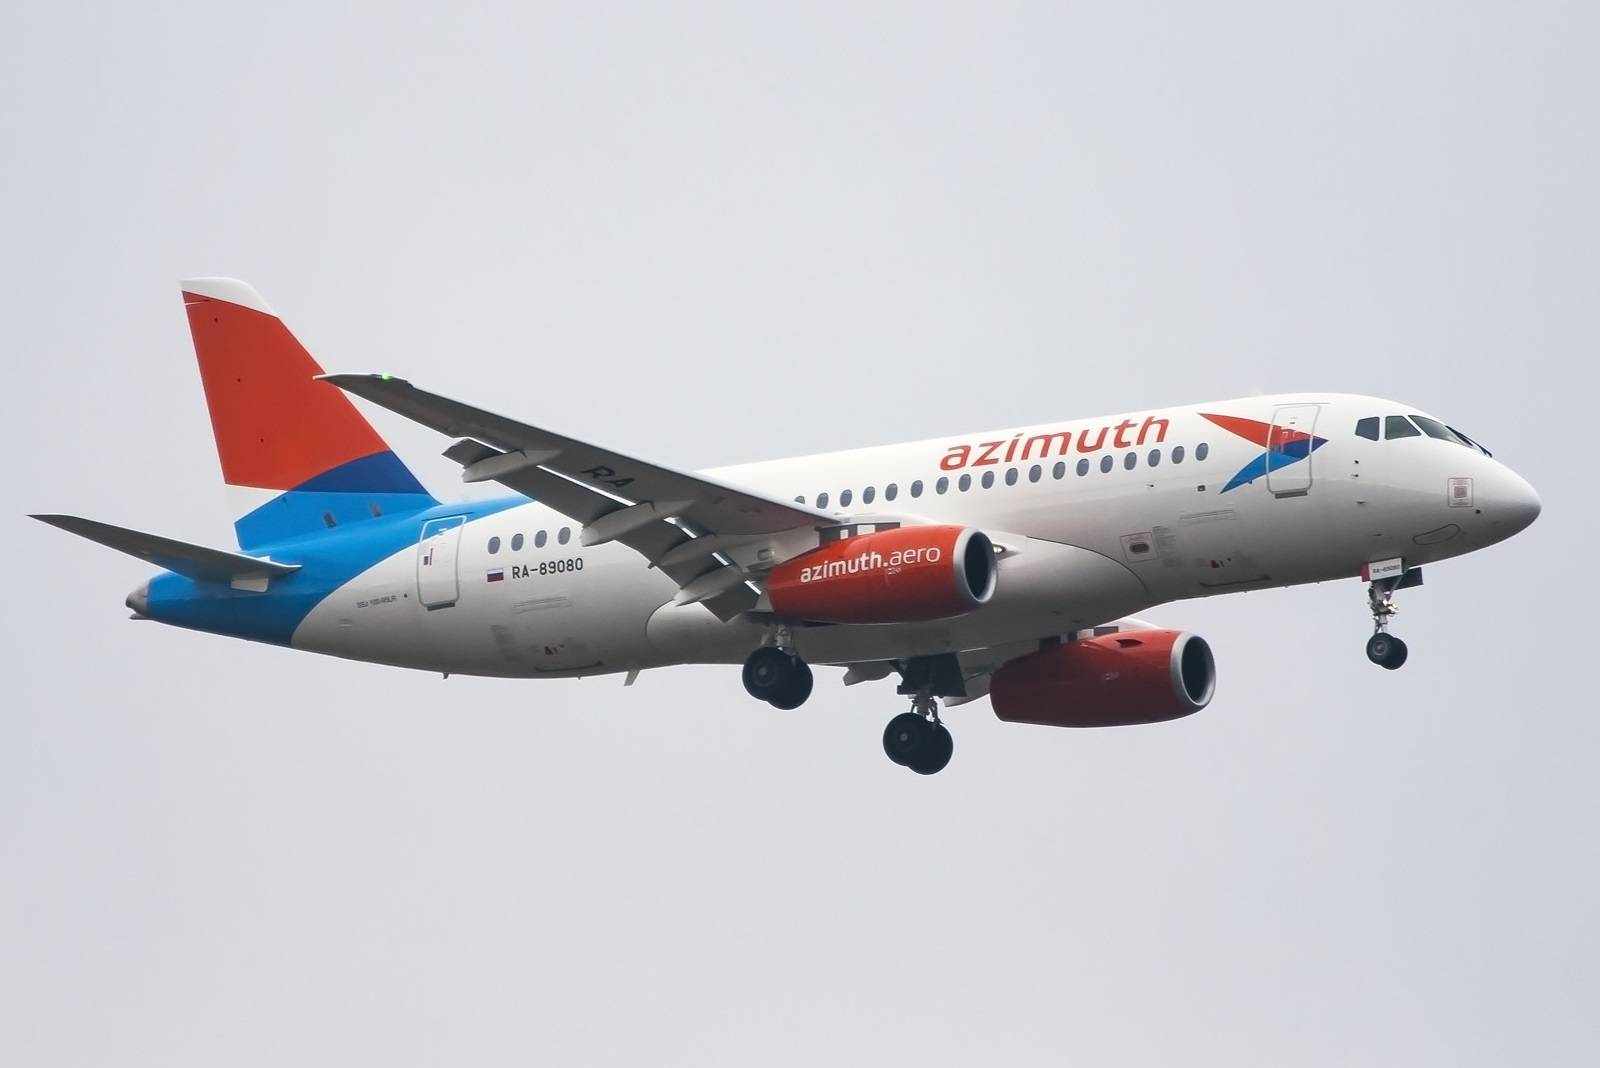 INCIDENT: Sukhoi Superjet Extends Gear By Mistake!